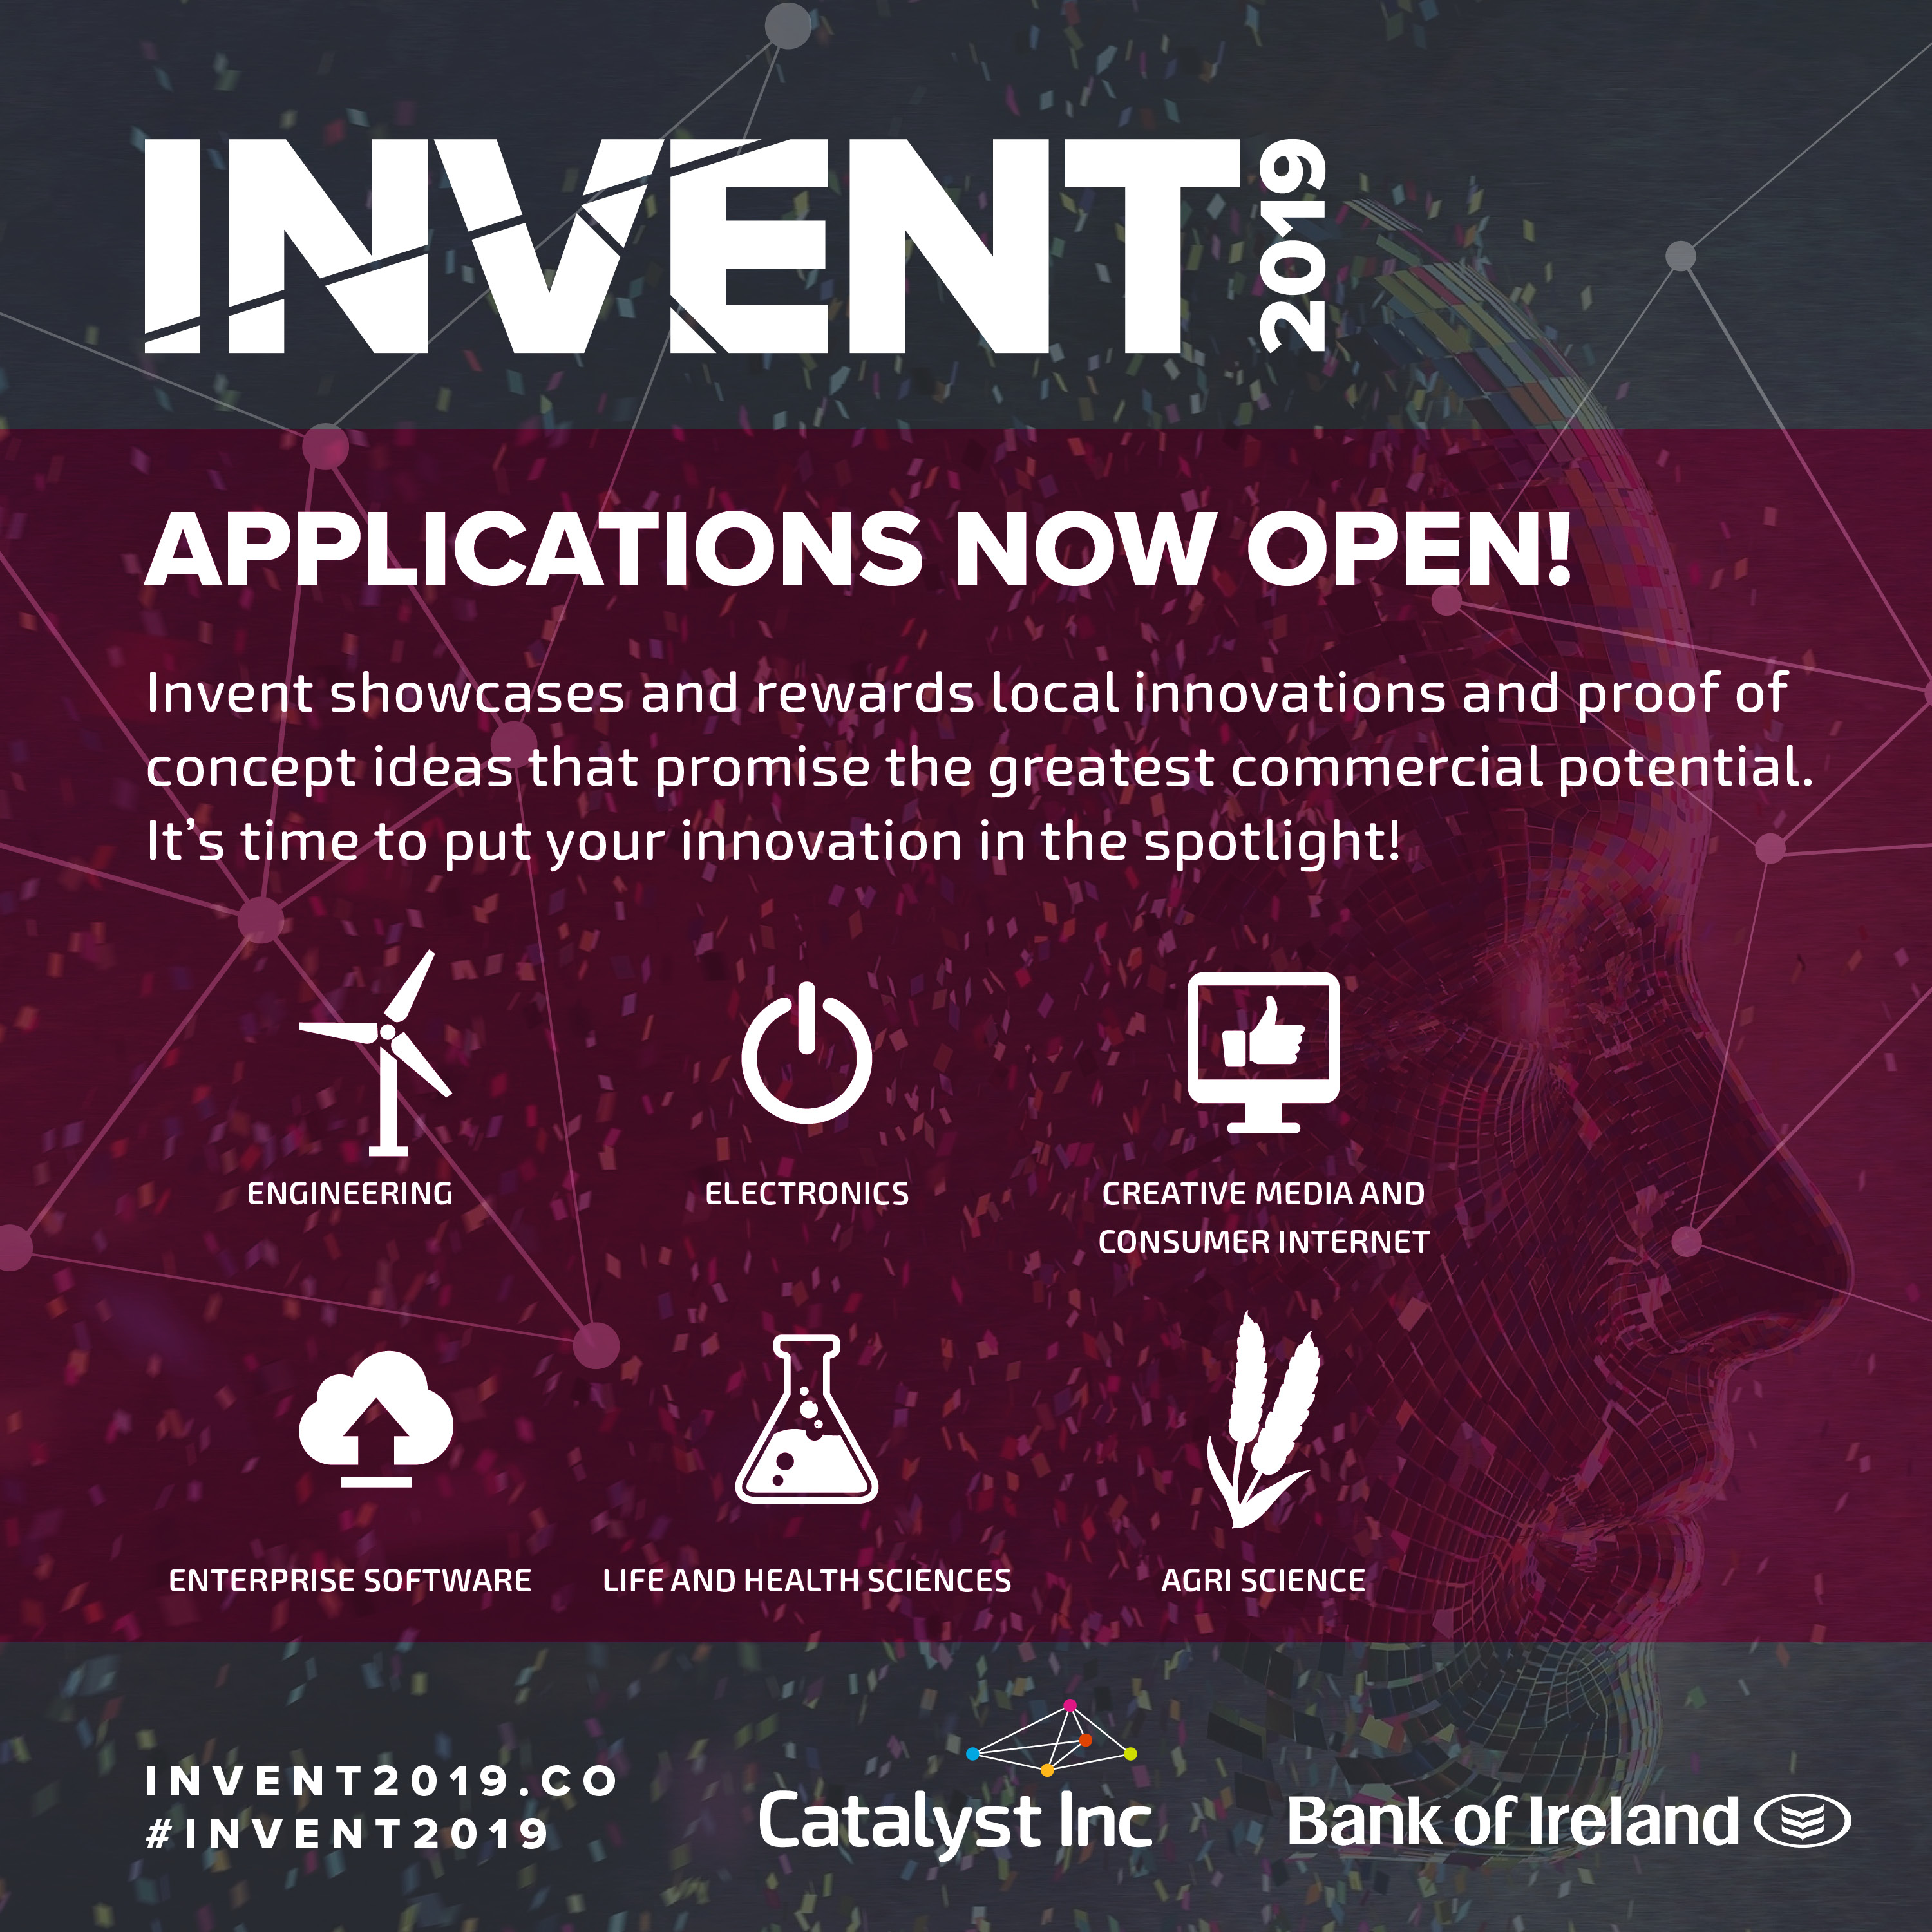 Link to **INVENT 2019 COMPETITION ** post